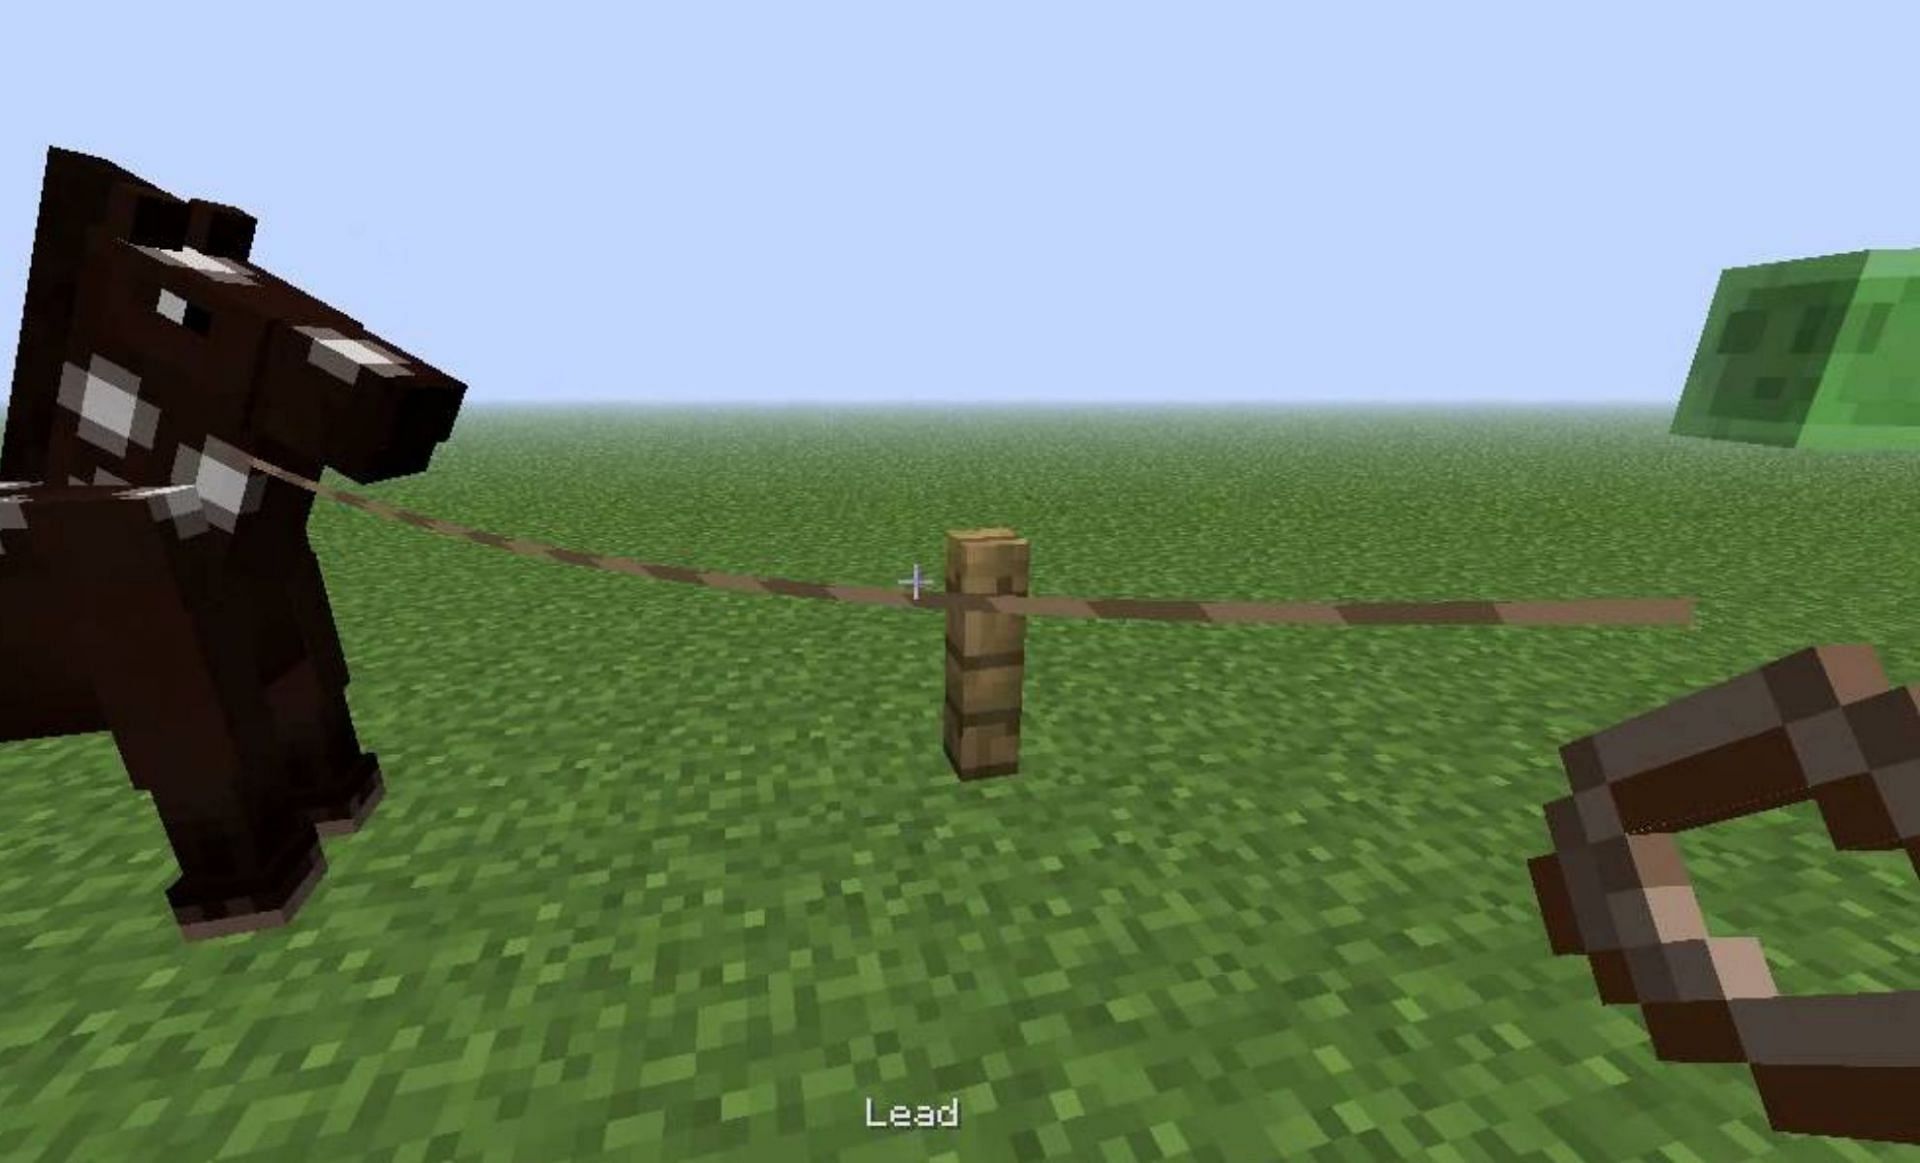 Leads can attach horses to fences (Image via Mojang)